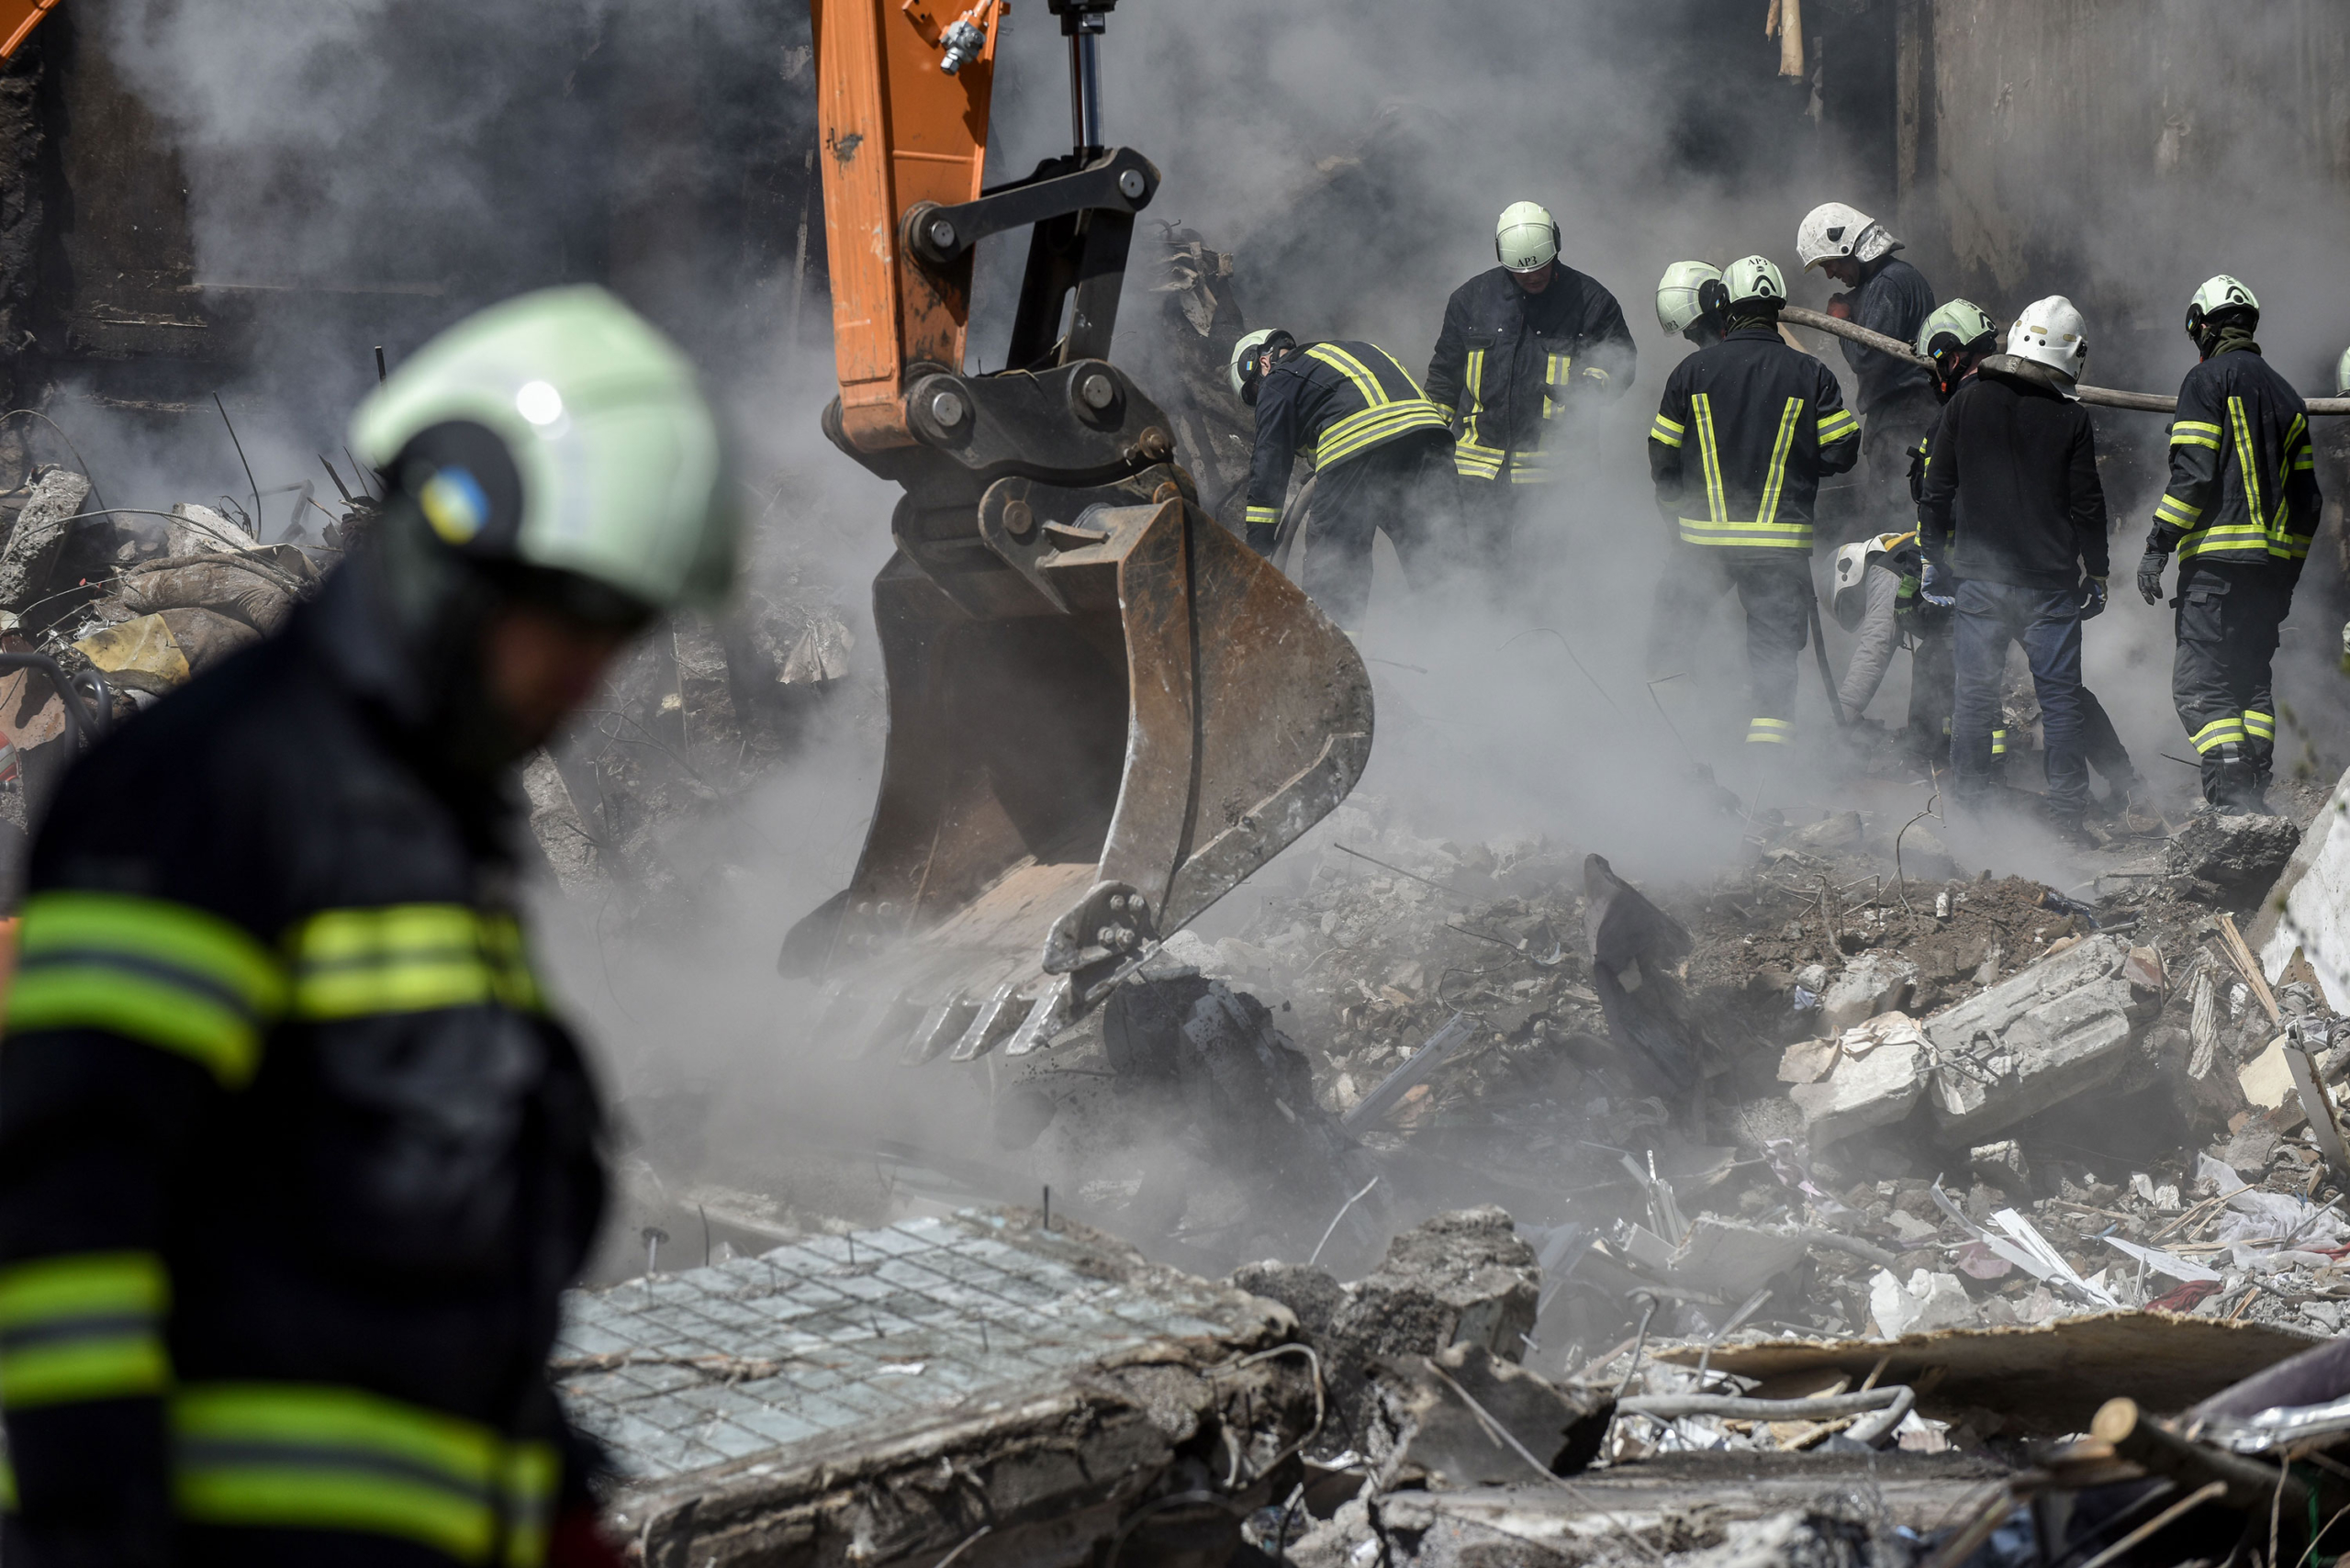 Rescuers work at the site of a damaged residential building in Uman, Ukraine, on Friday. (Oleg Petrasyuk/EPA-EFE/Shutterstock)